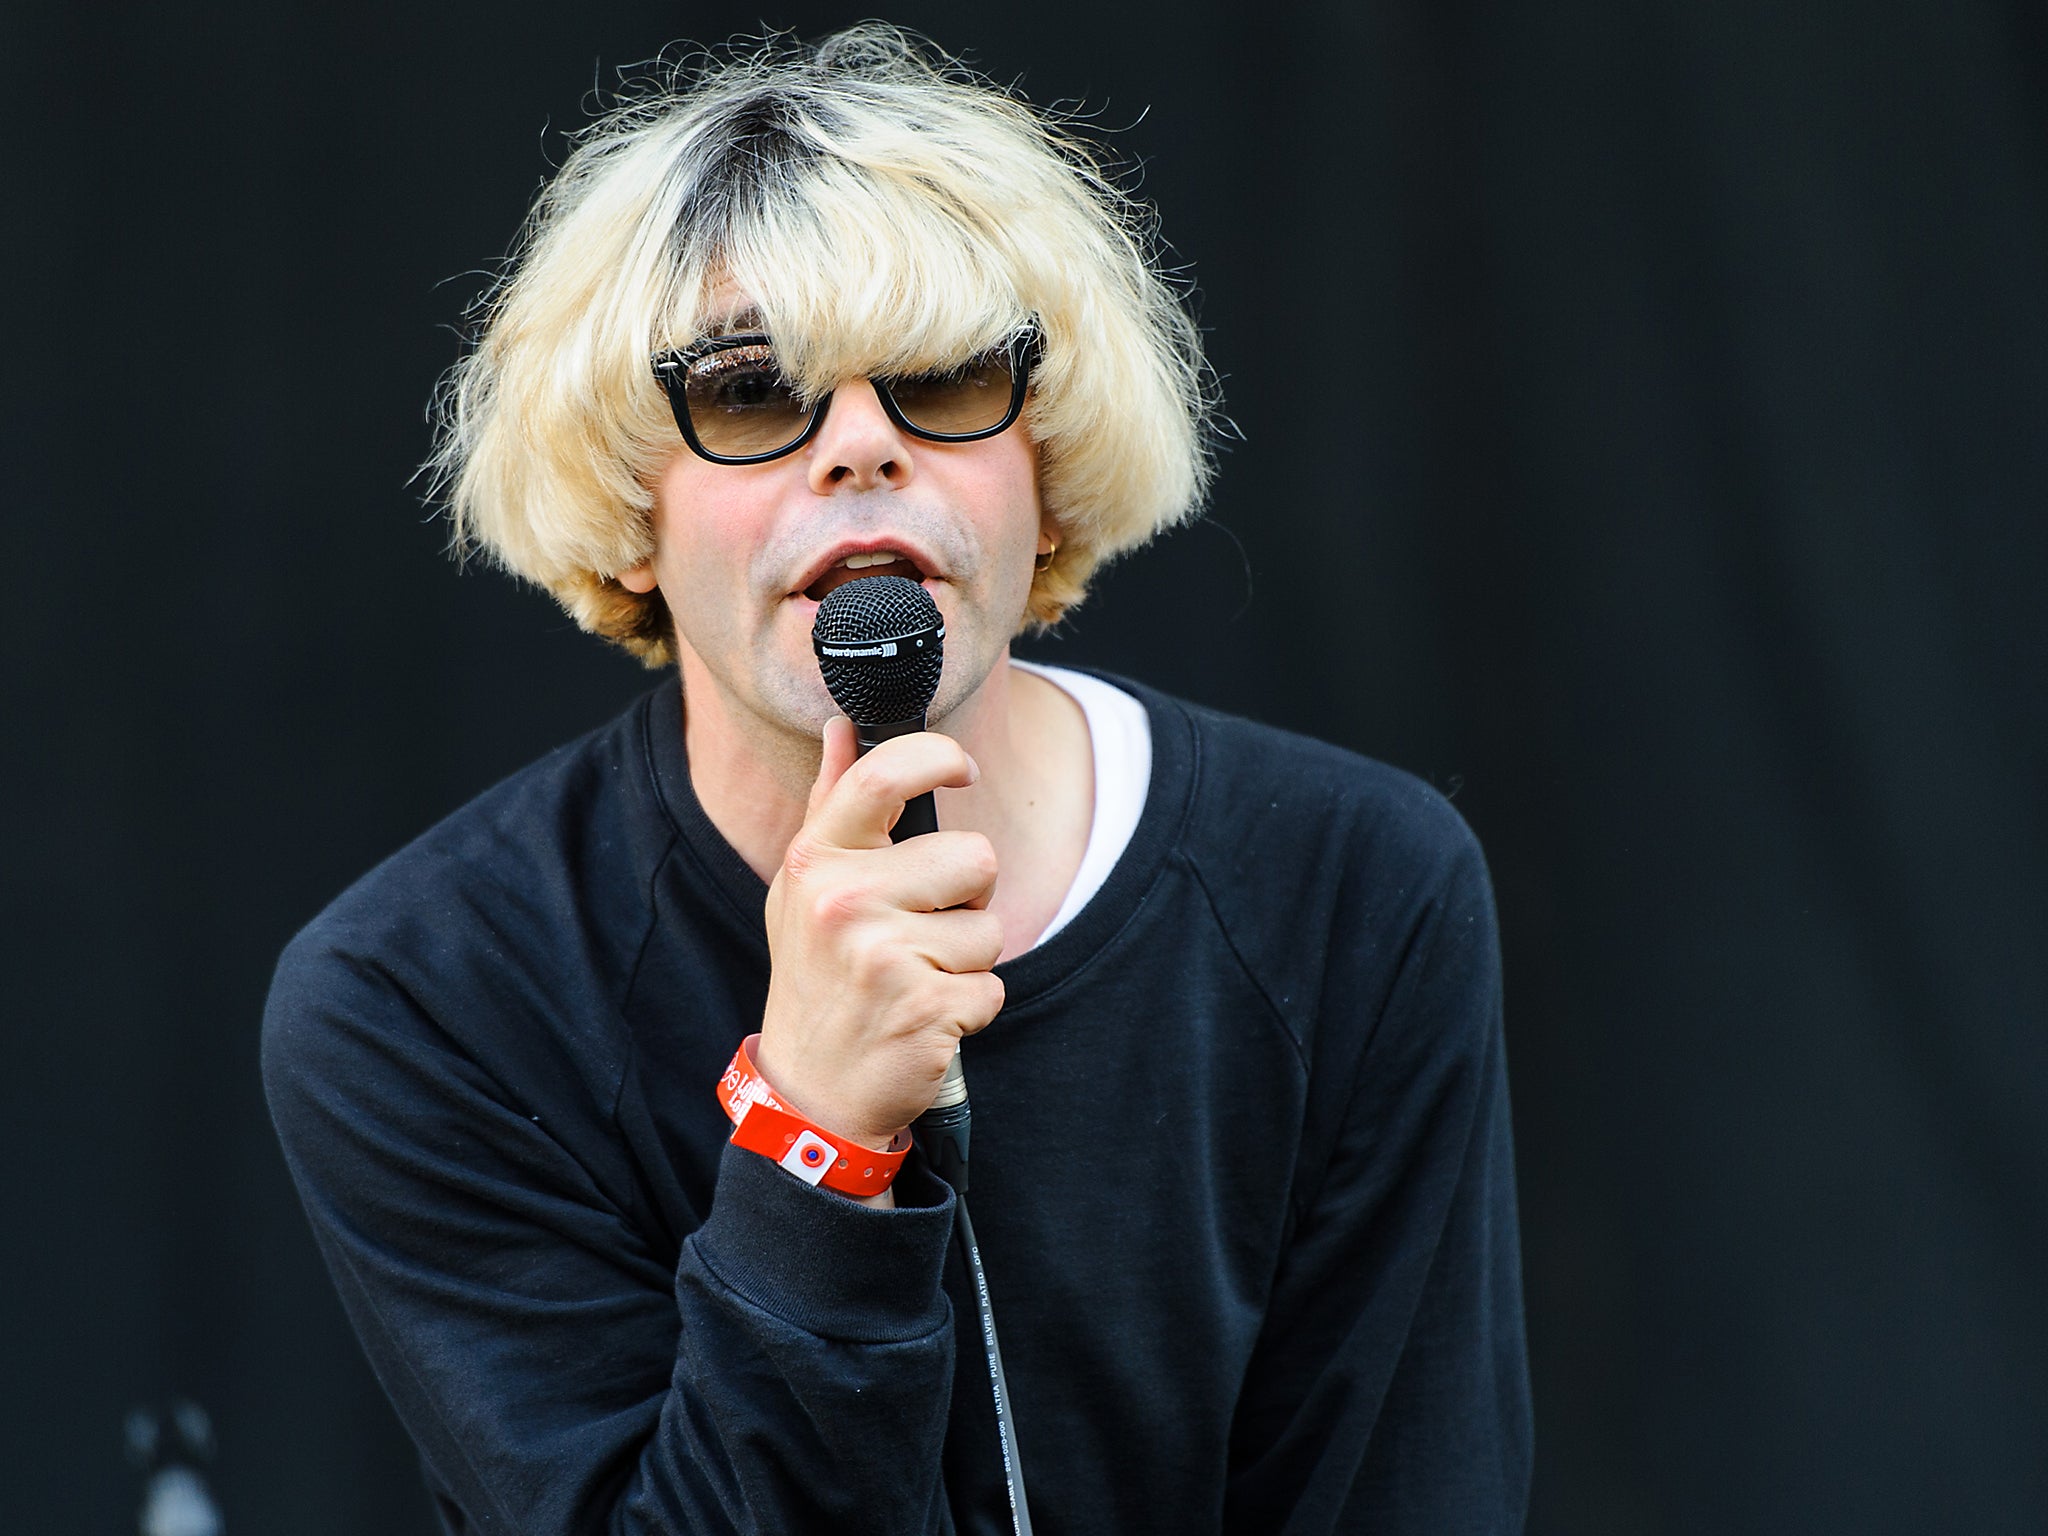 Tim Burgess has been throwing wildly popular ‘listening parties’ on Twitter since March